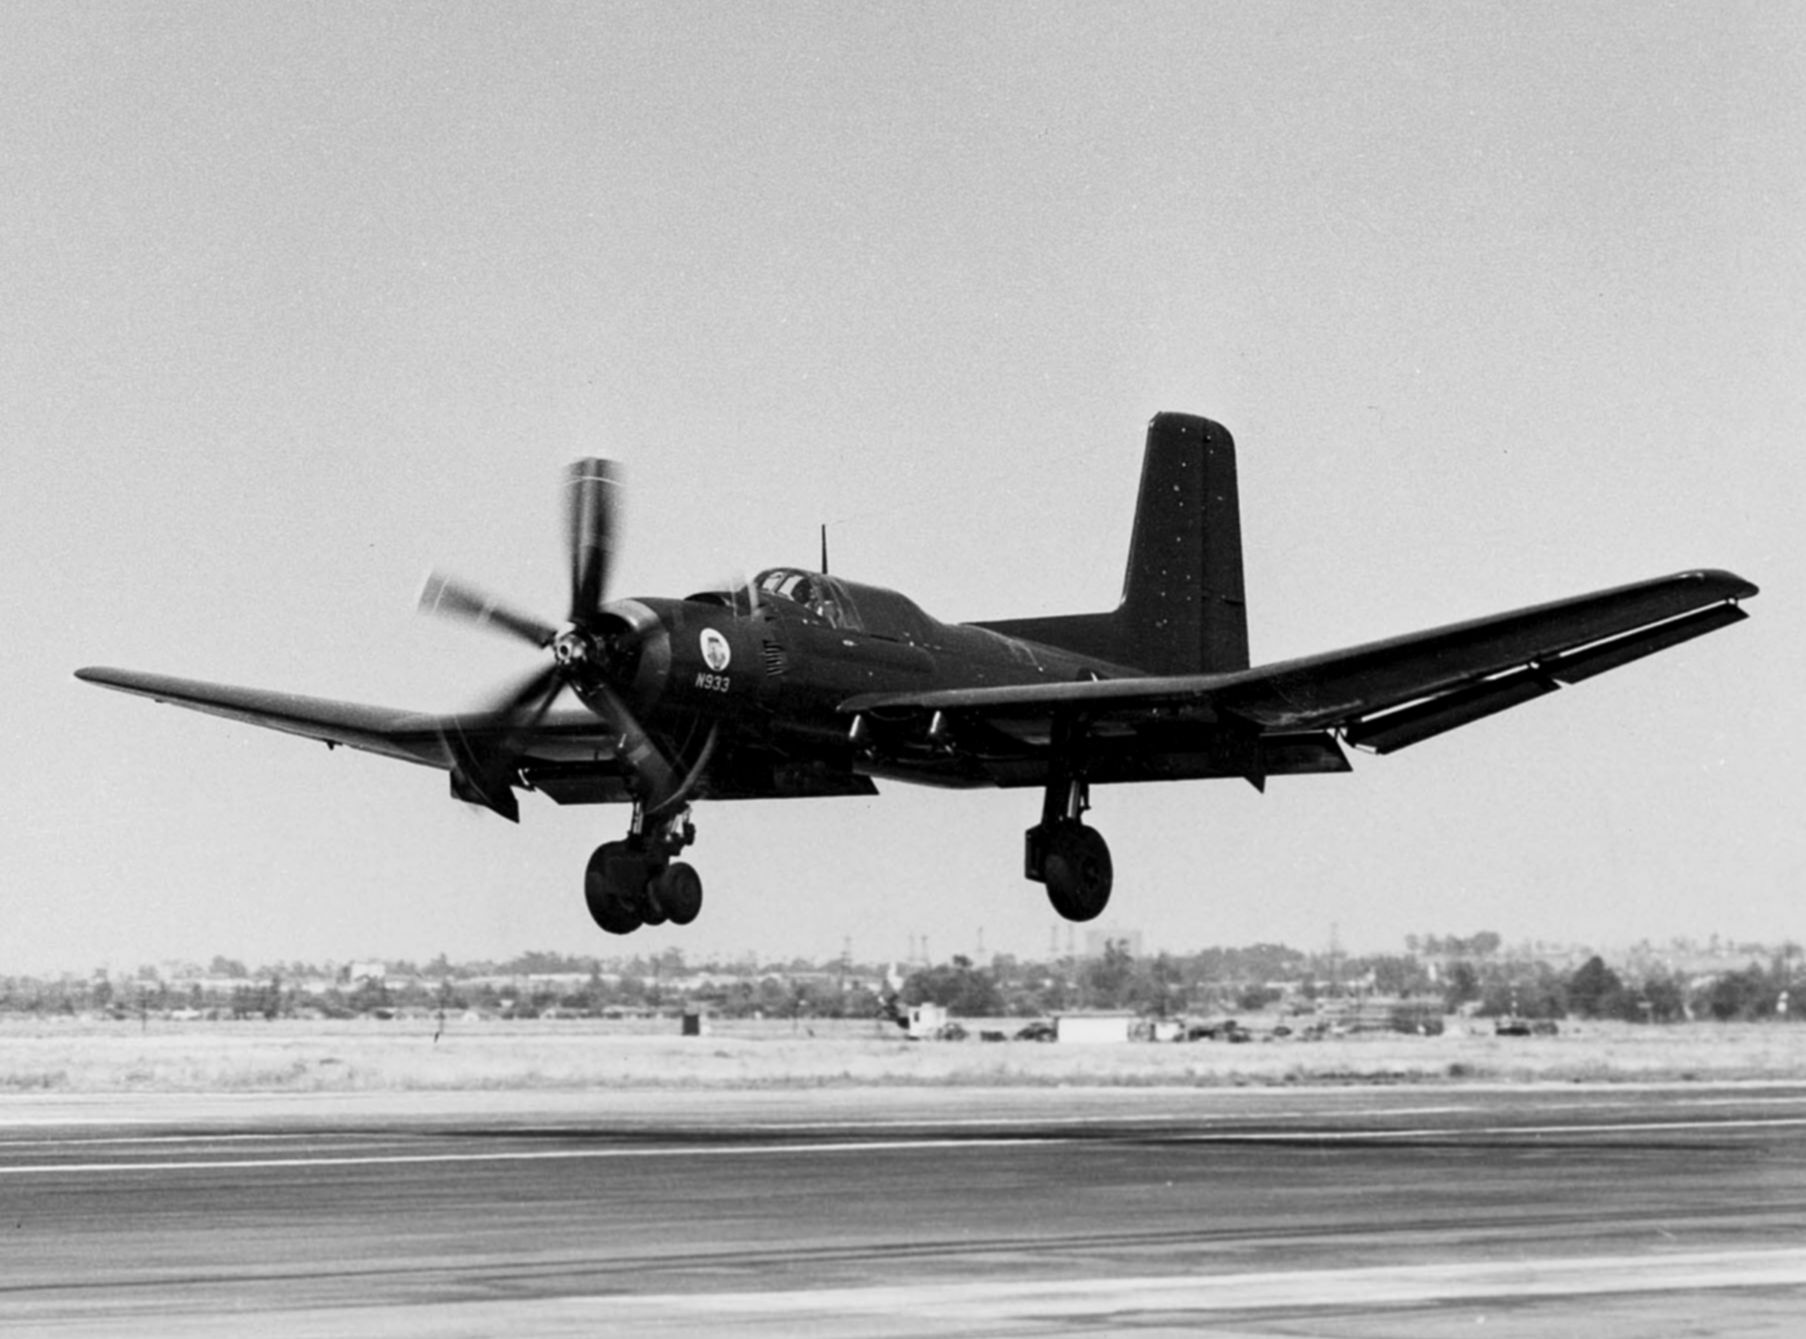 A Douglas XTB2D Skypirate about to land.